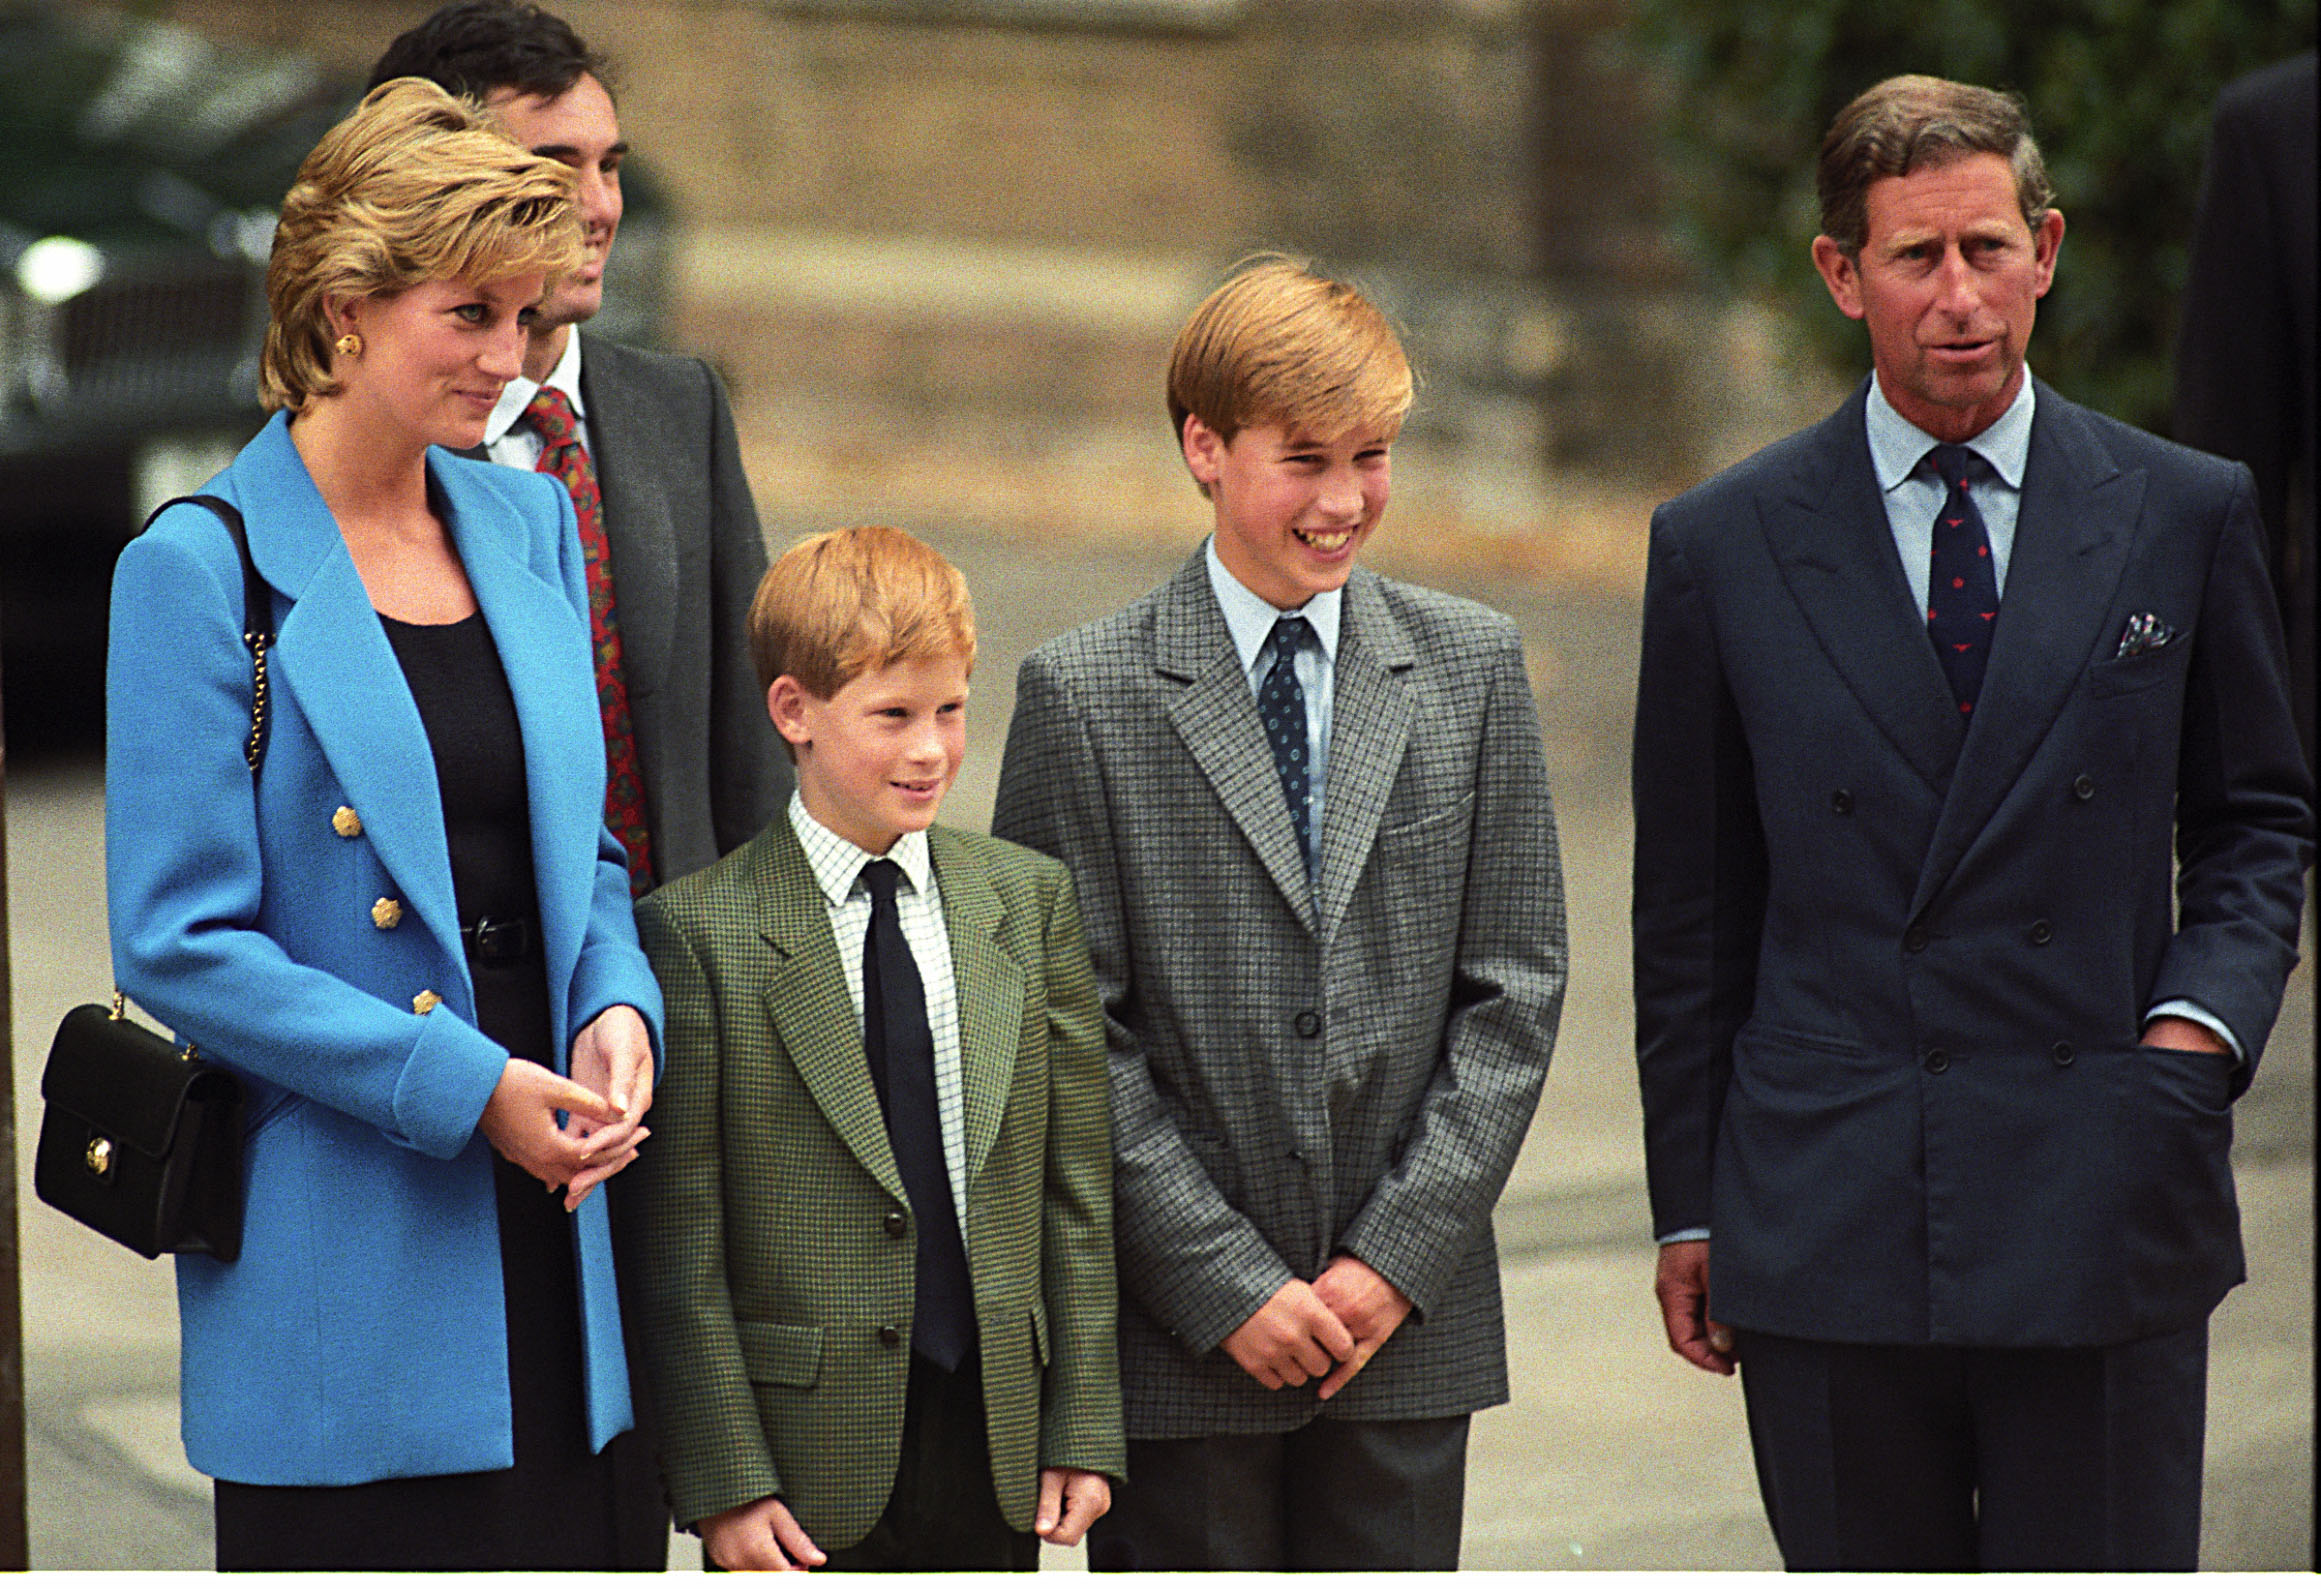 Princess Diana, Prince Harry, Prince William, and Prince Charles smiling at Prince William's first day at Eton